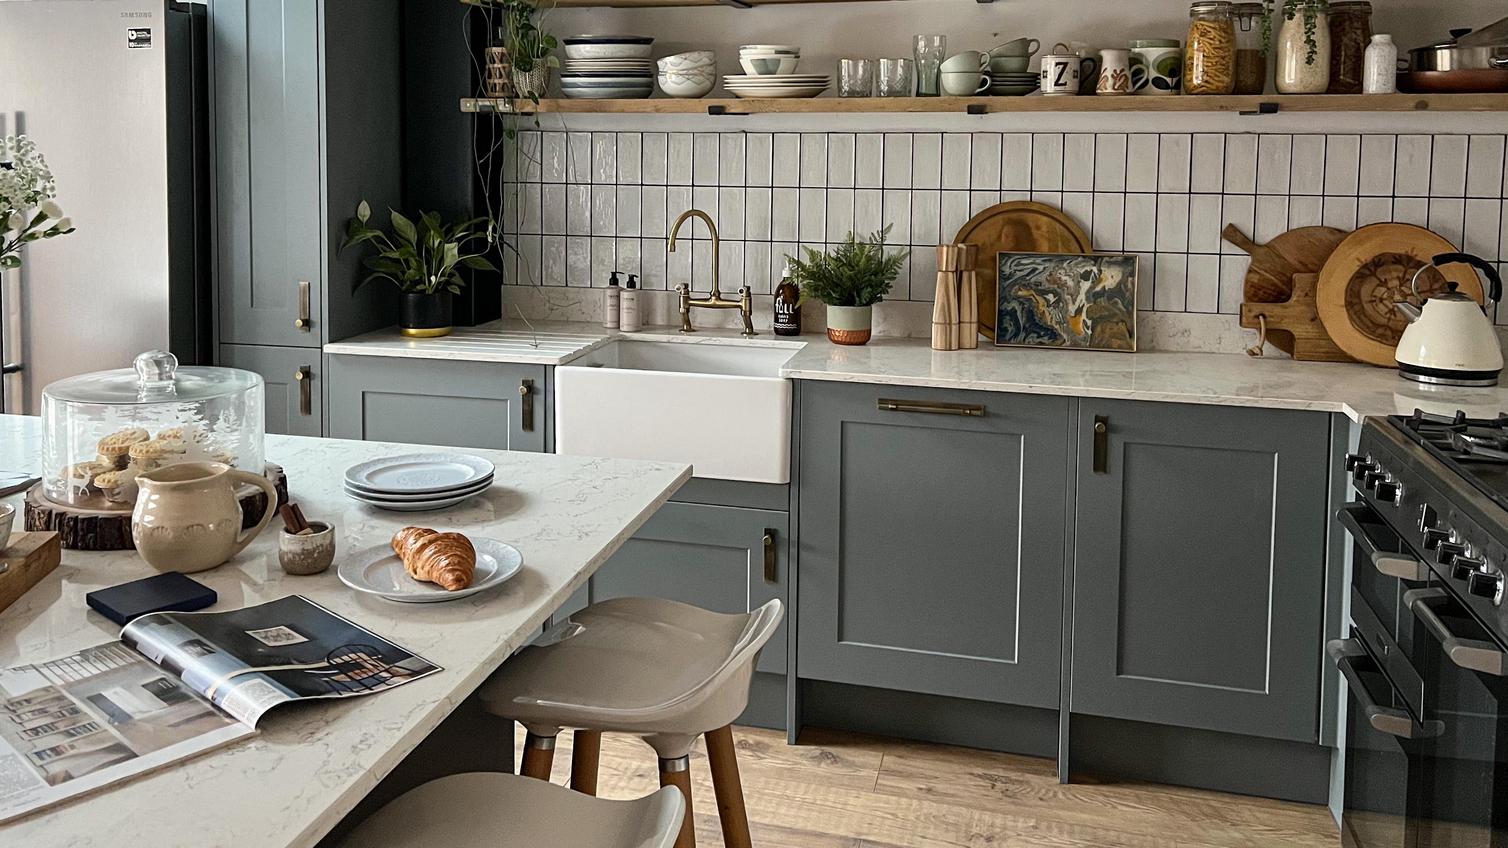 Dusk blue shaker kitchen with an island, white quartz worktop, open wood shelving, and kitchen accessories.